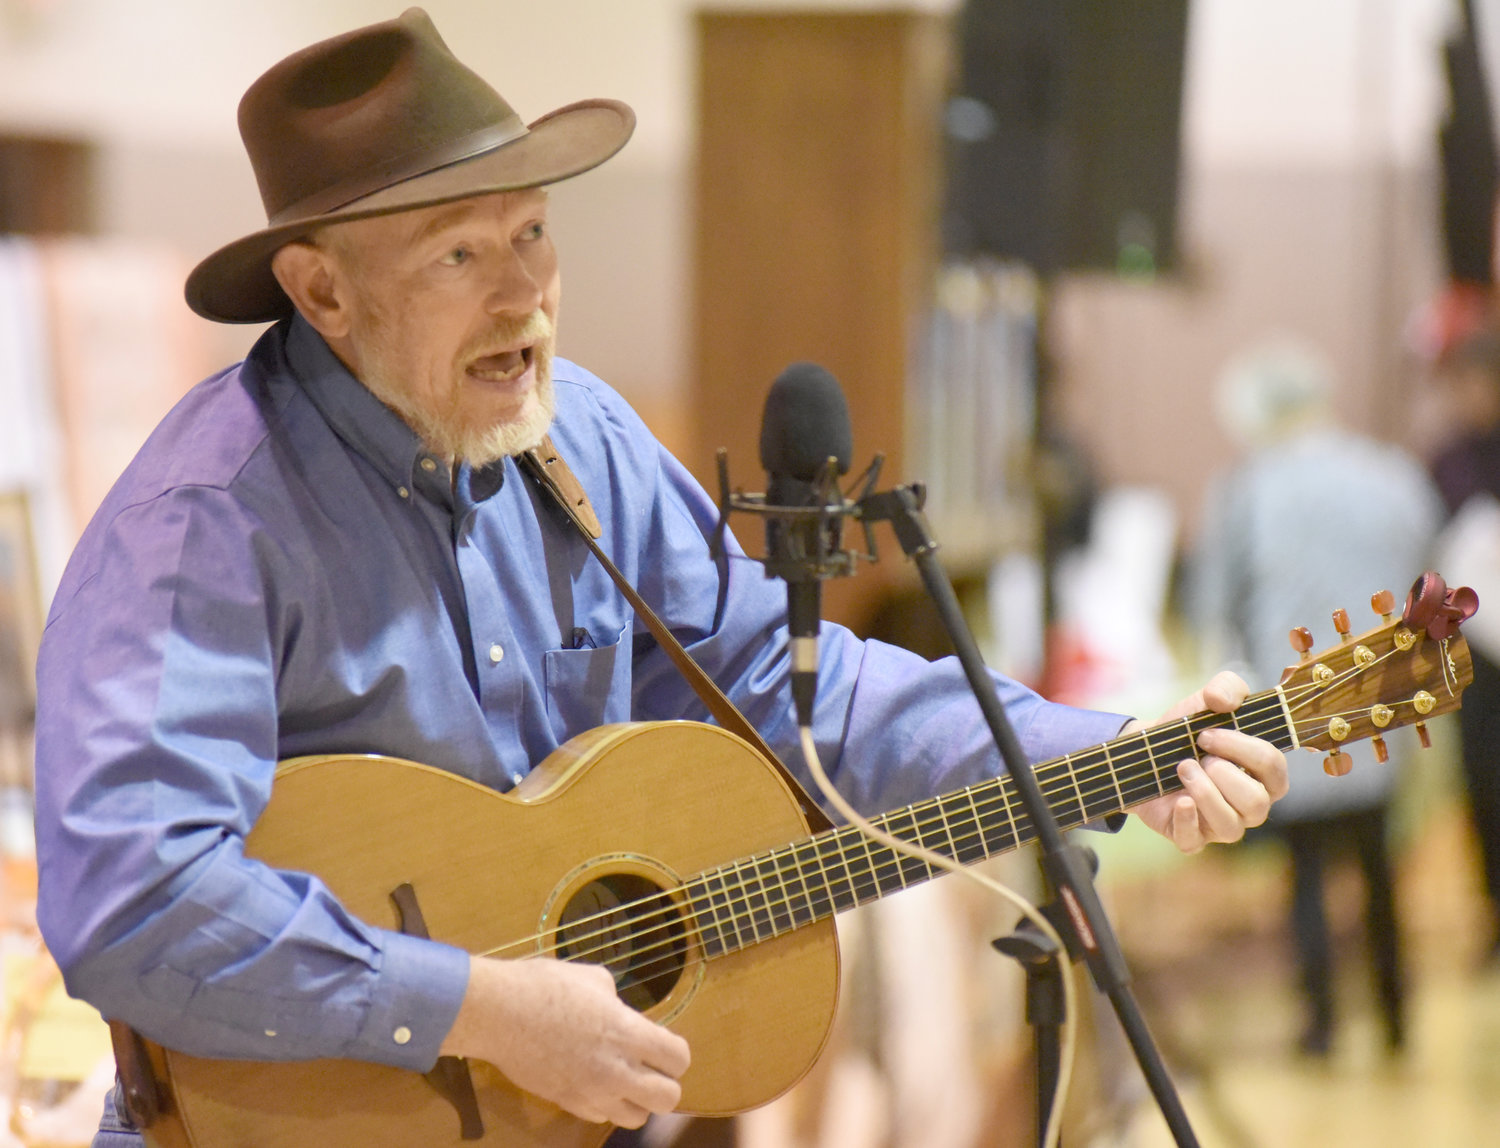 Mark Wilson sings prior to the start of the auction on Friday evening at the Pleasantview Benefit Sale.